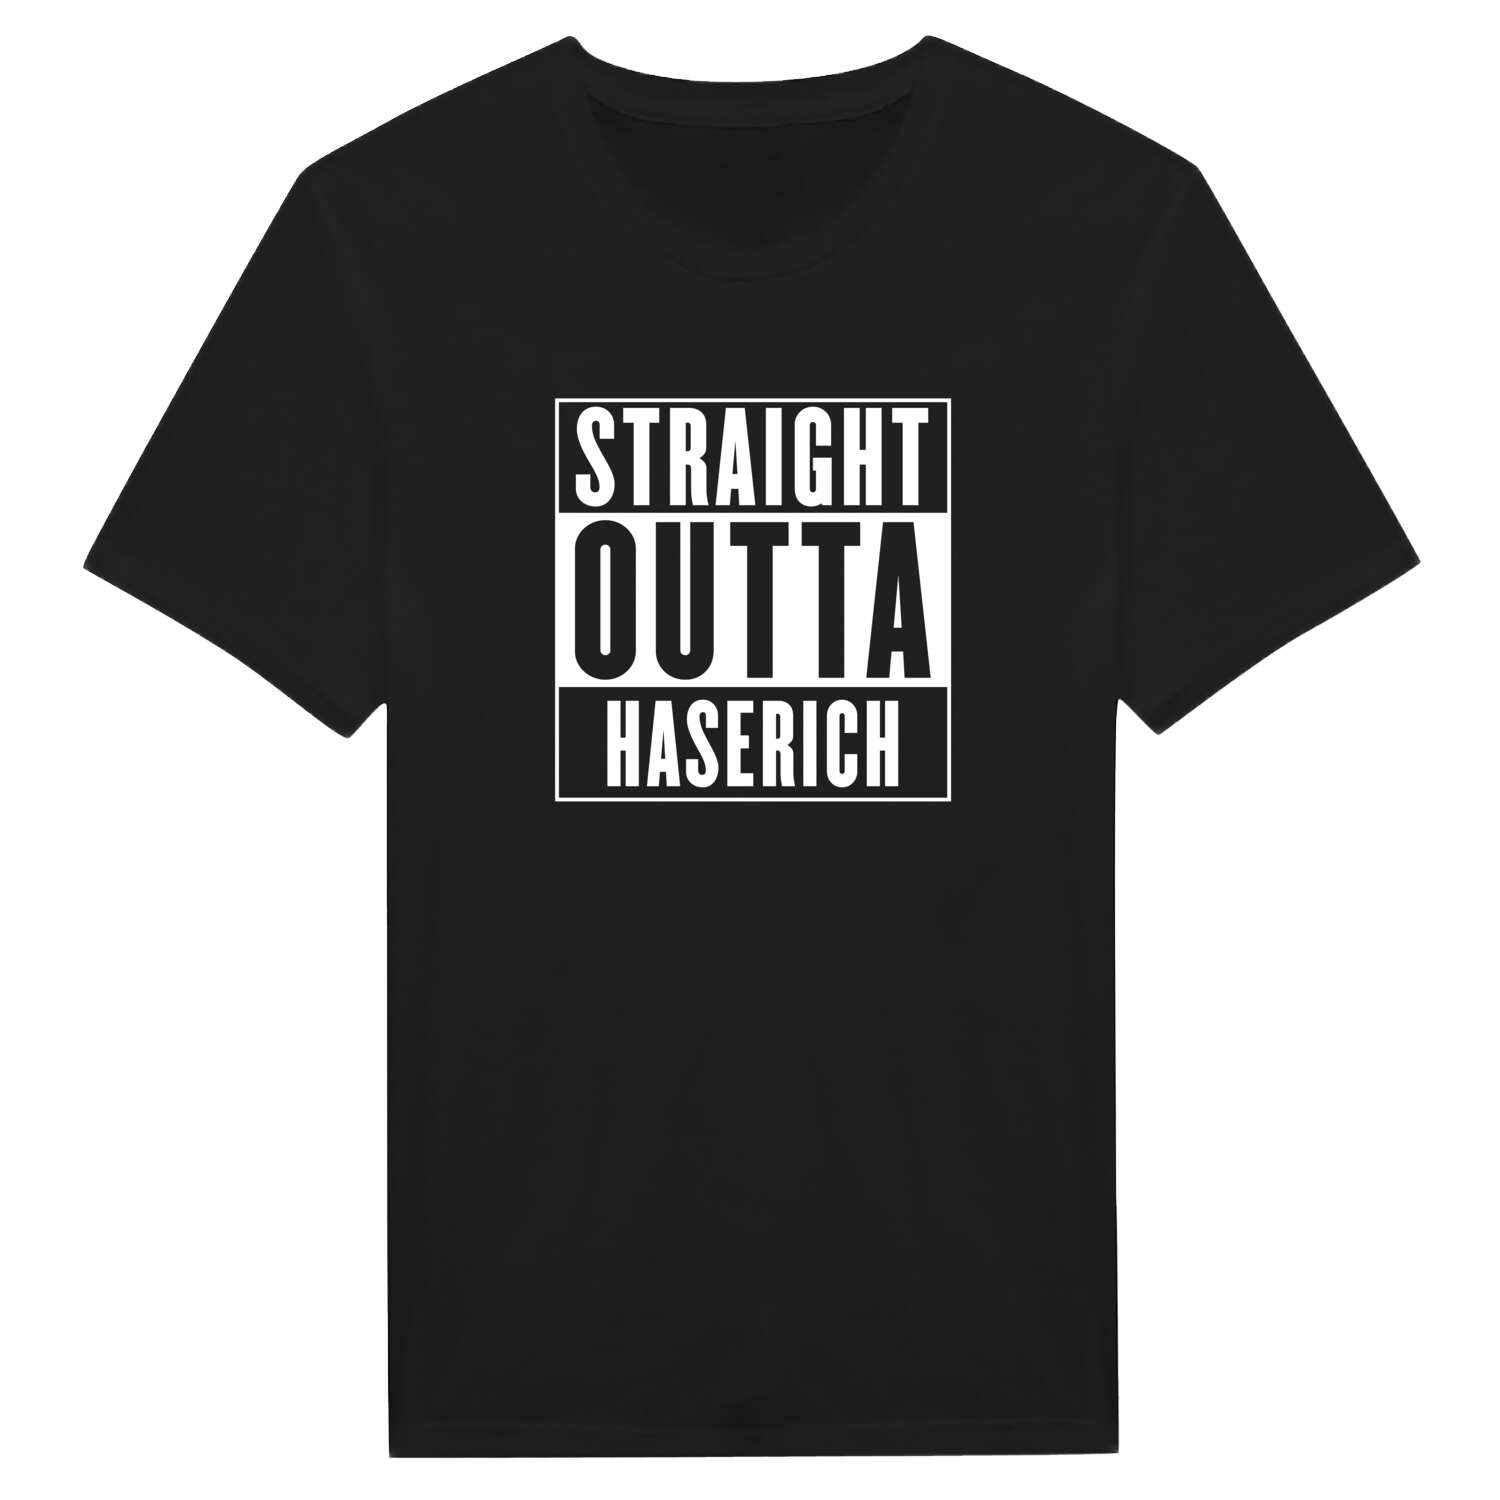 Haserich T-Shirt »Straight Outta«